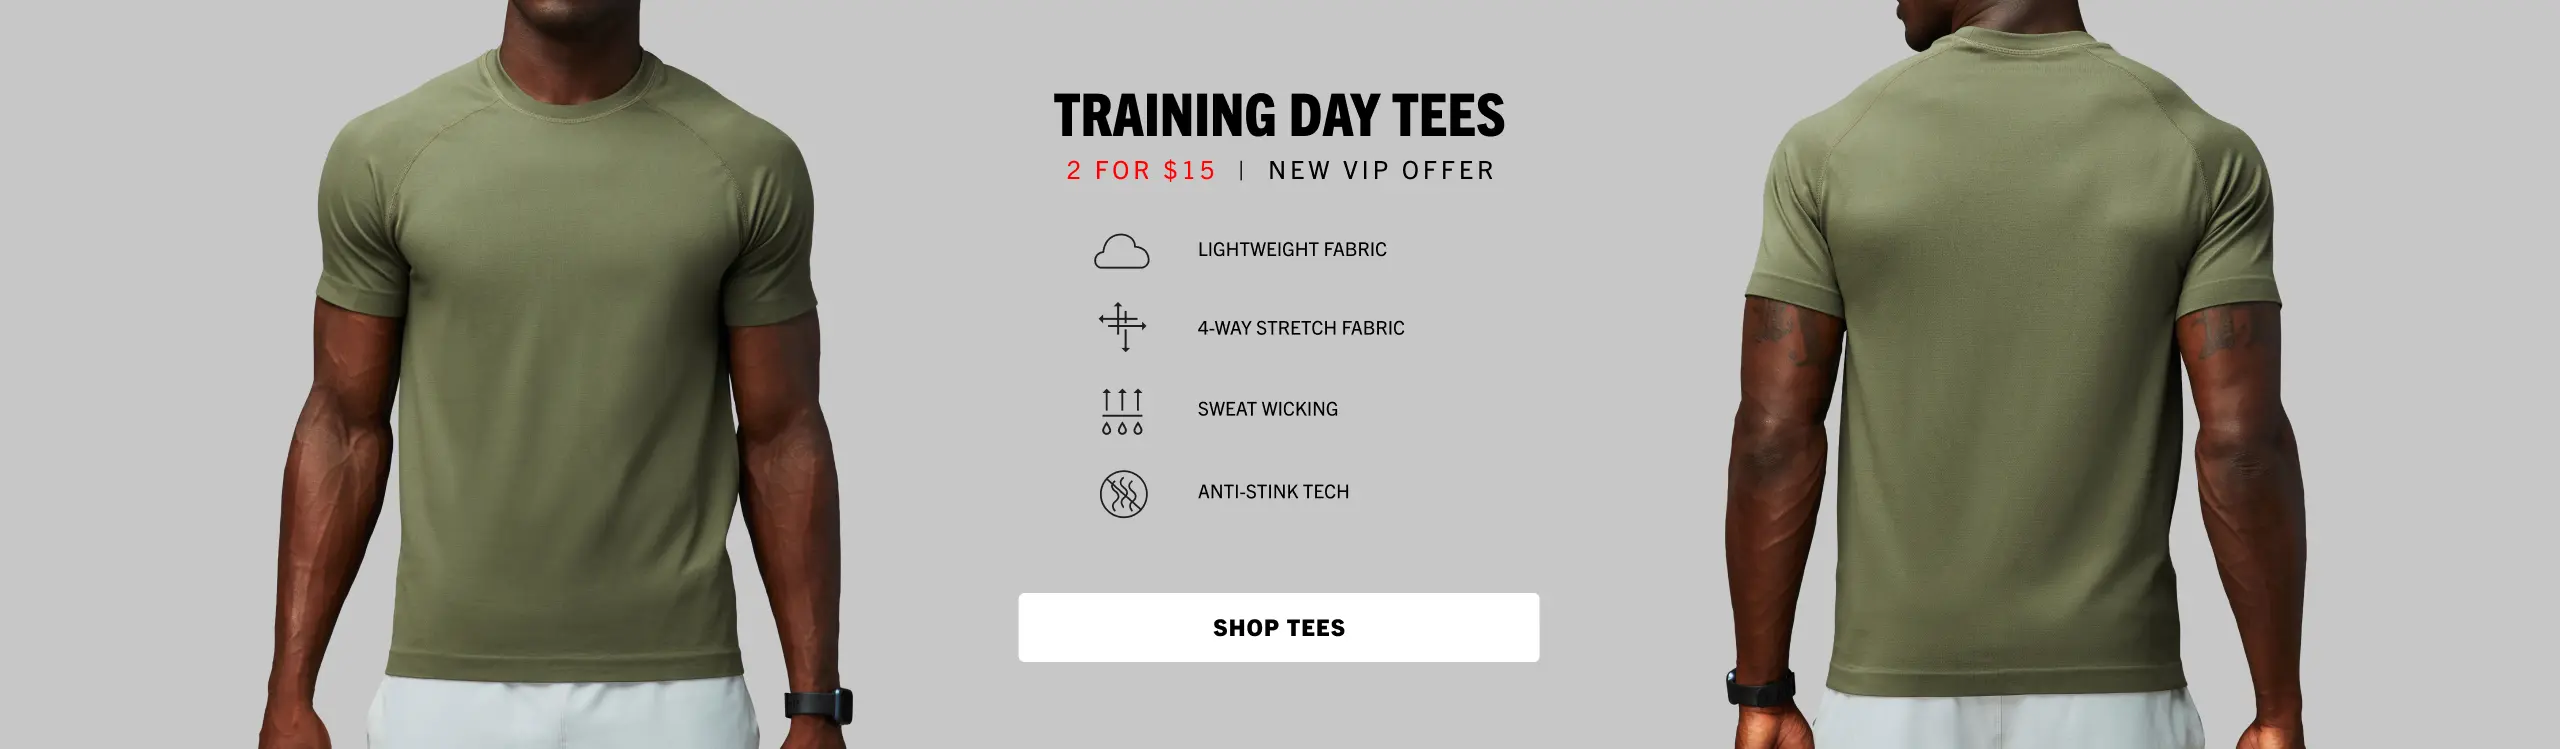 Training day tees starting at $15 when you check out as a new VIP member.